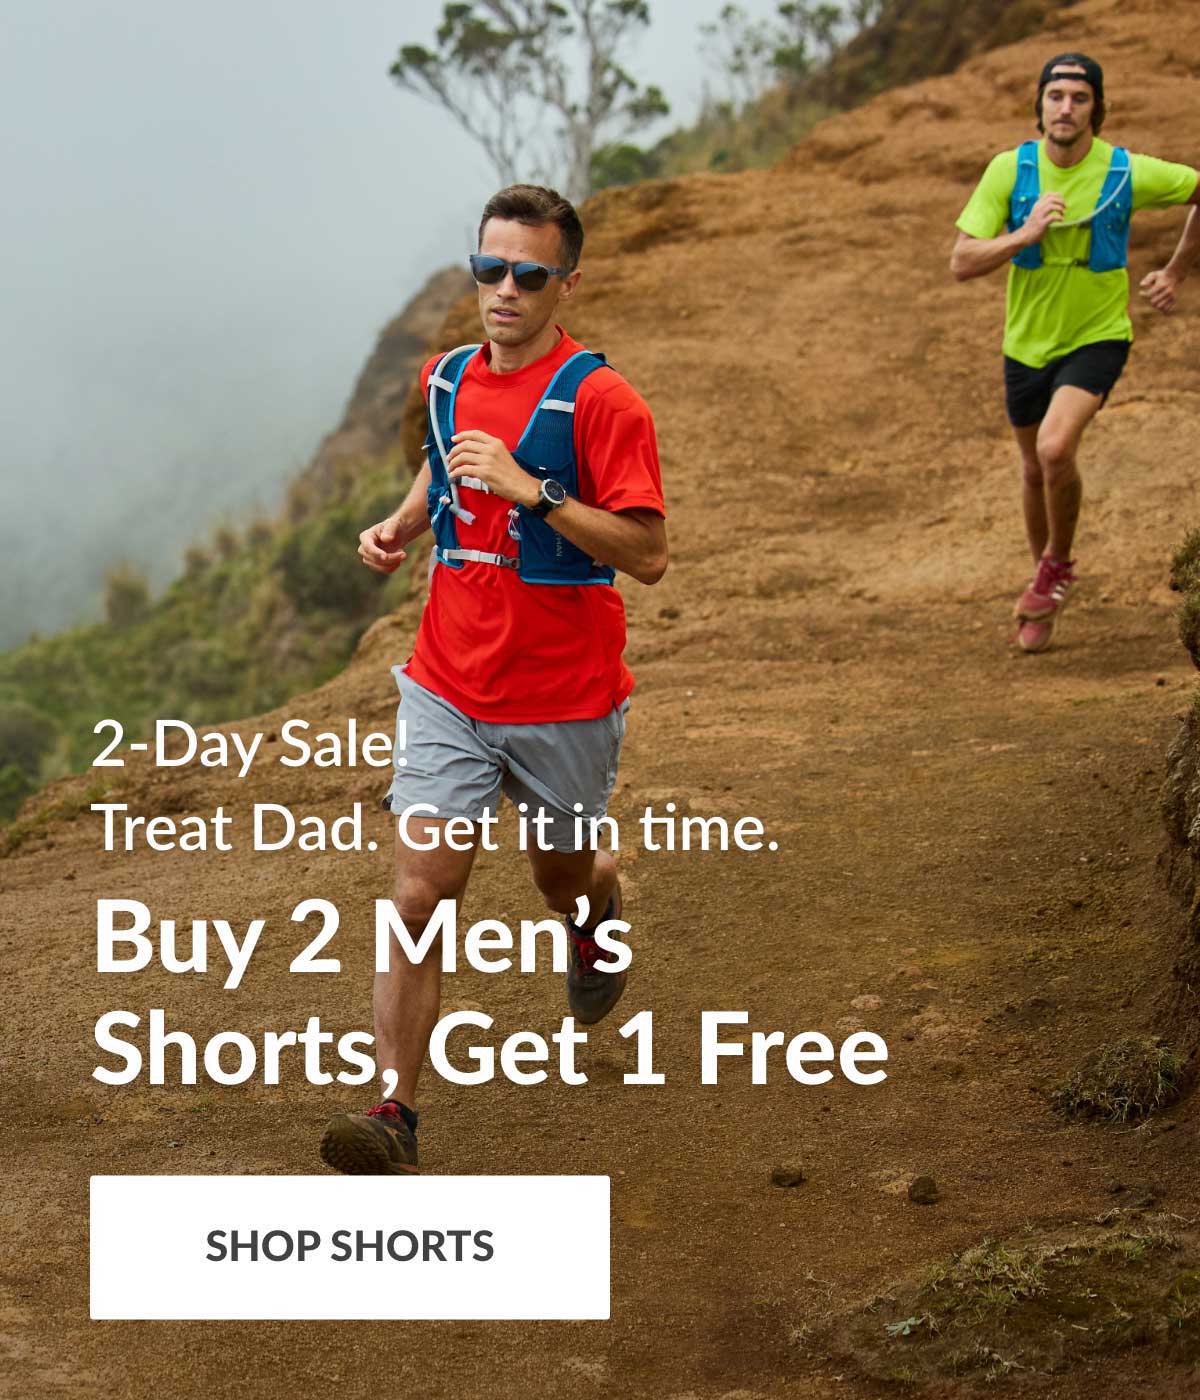 2-Day Sale! Treat Dad. Get it in time. Buy 2 Men's Shorts, Get 1 Free - SHOP SHORTS